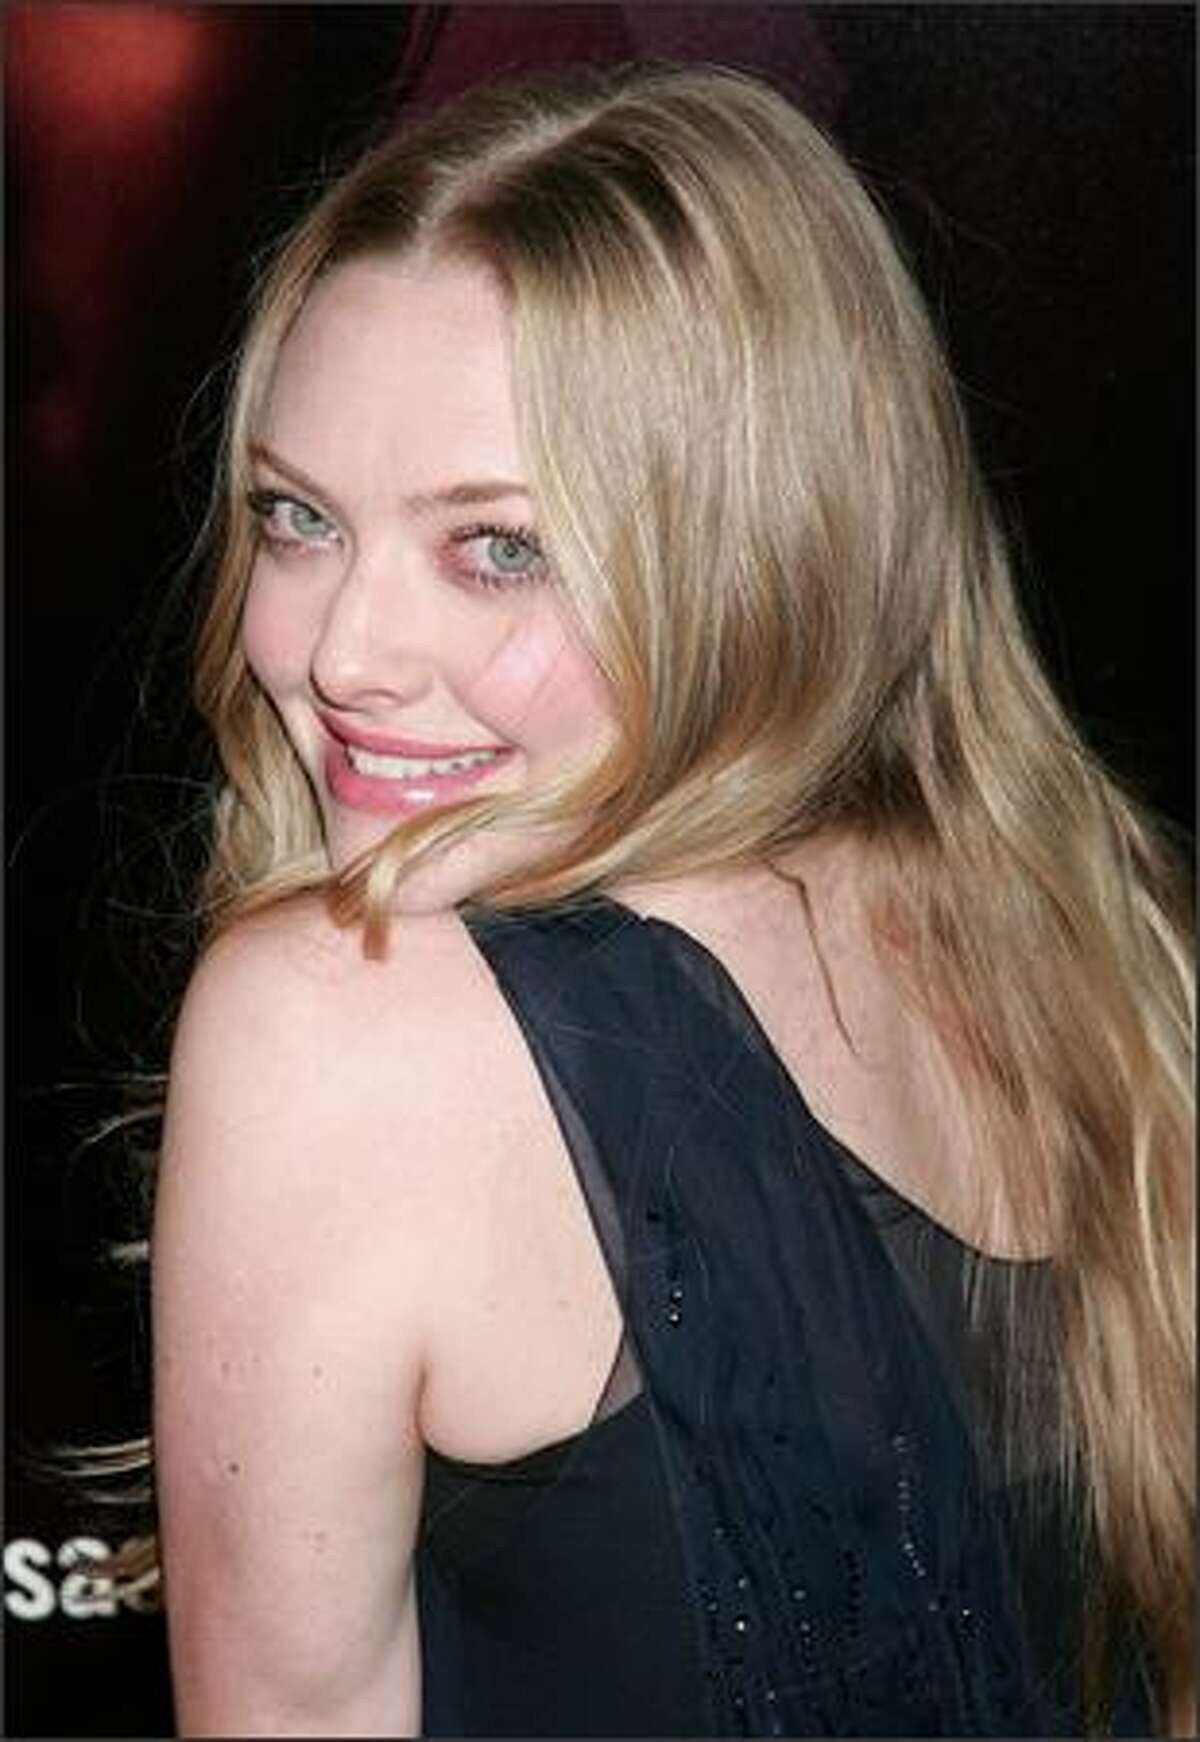 Actress Amanda Seyfried attends the premiere of HBO's "Big Love" 3rd season at the Cinerama Dome January 14, 2009 in Hollywood, California.